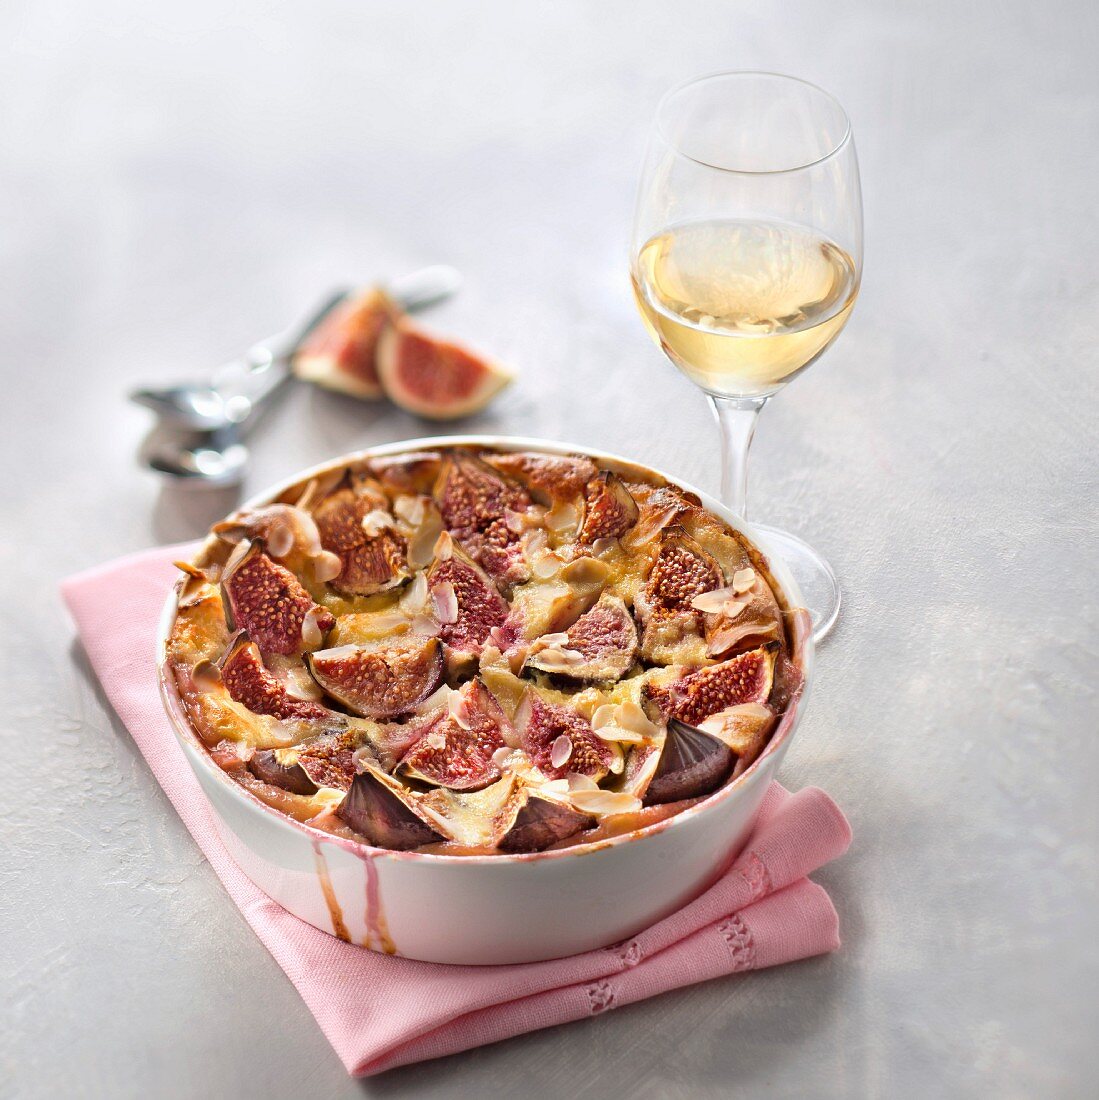 Gratin of figs with honey, glass of white wine